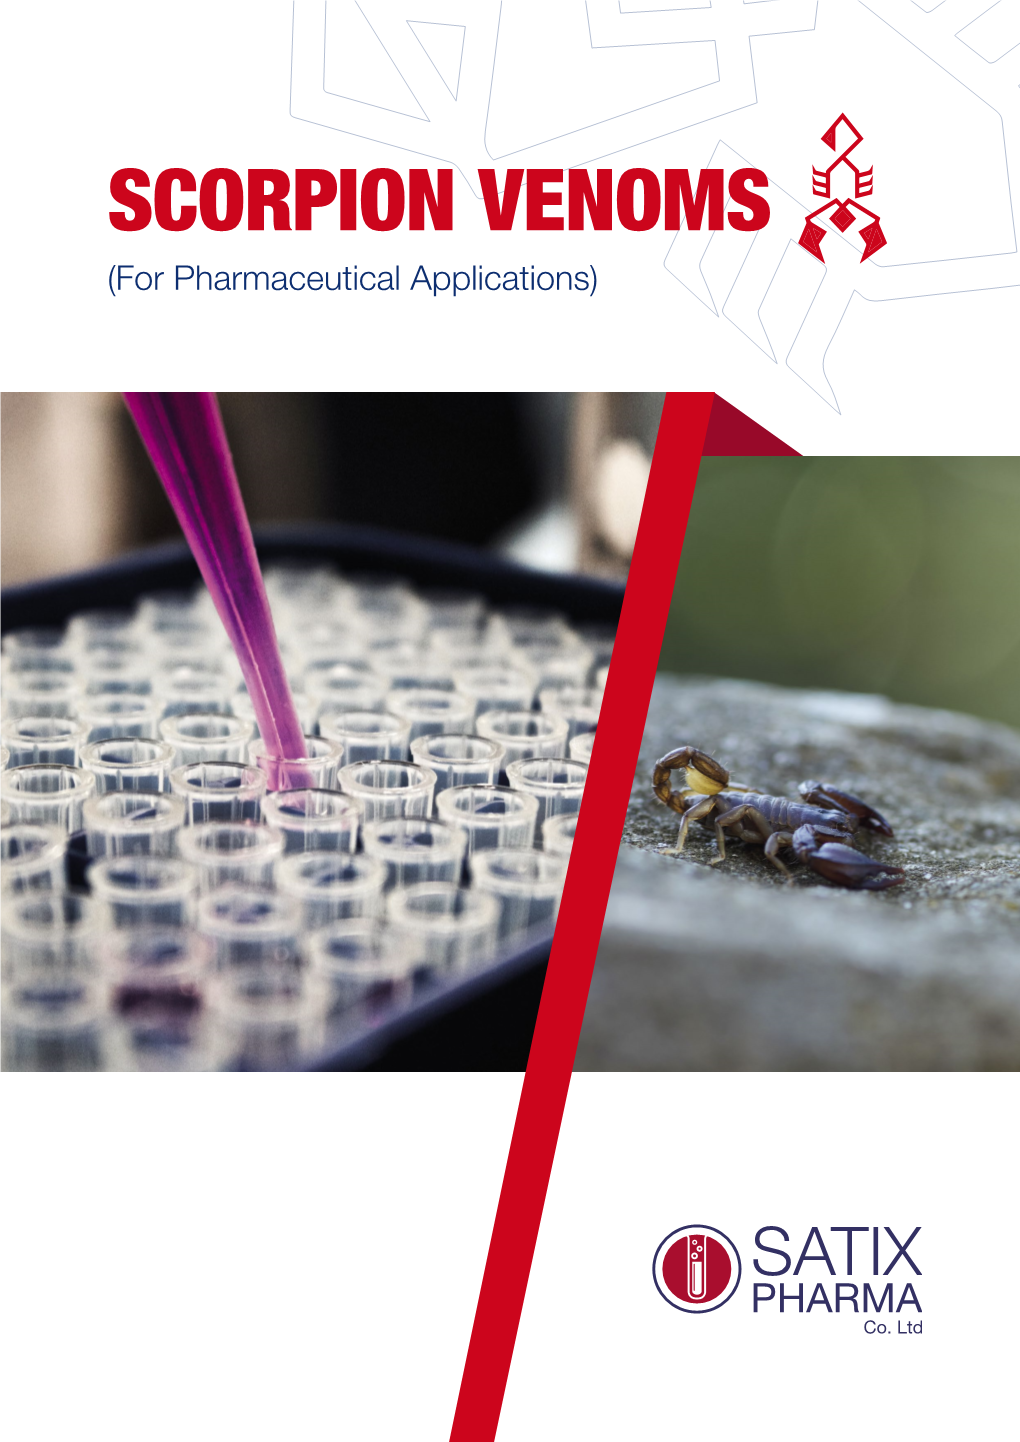 SCORPION VENOMS (For Pharmaceutical Applications) ABOUT US